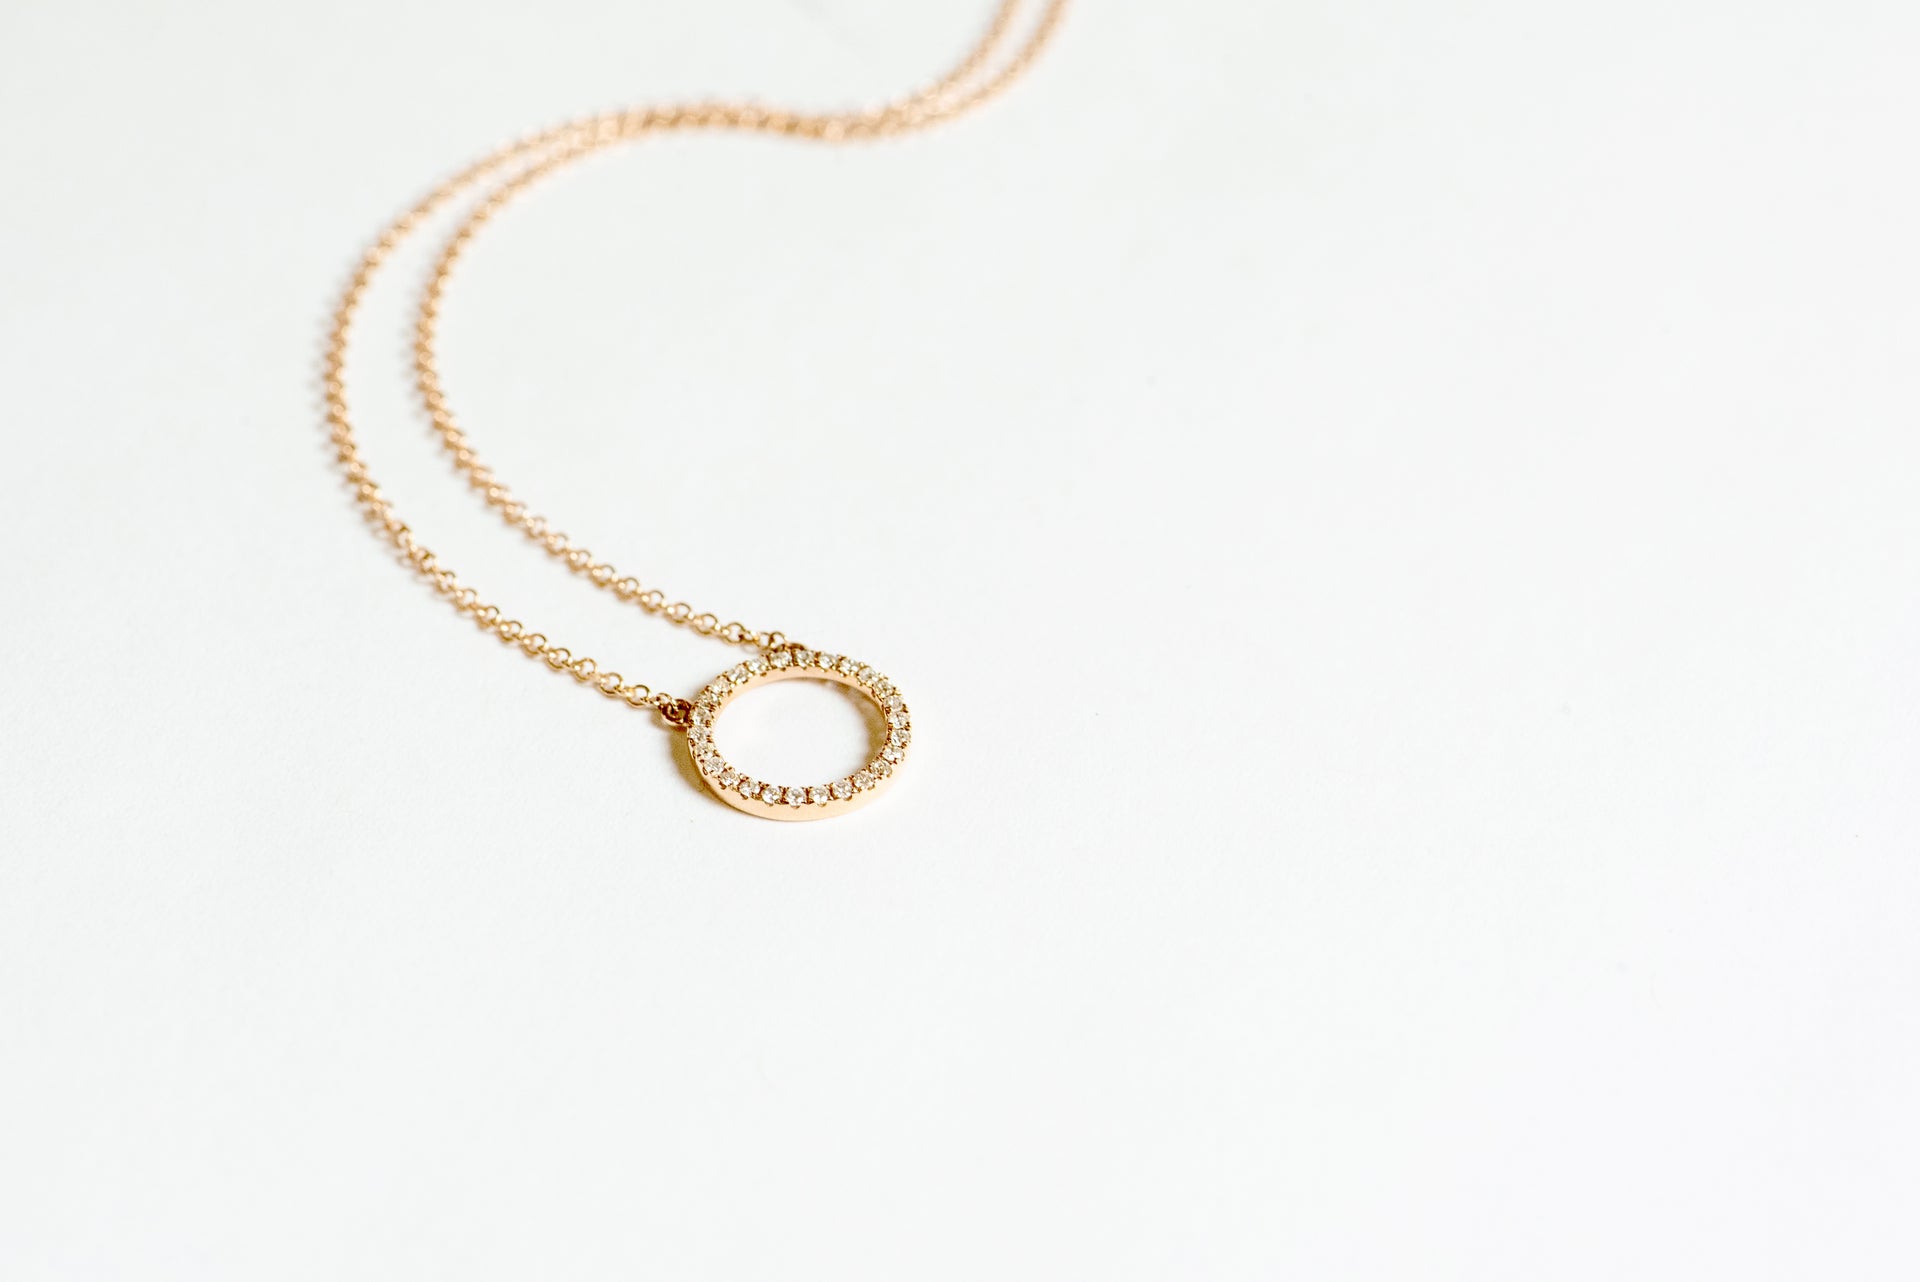 "Everly" Necklace